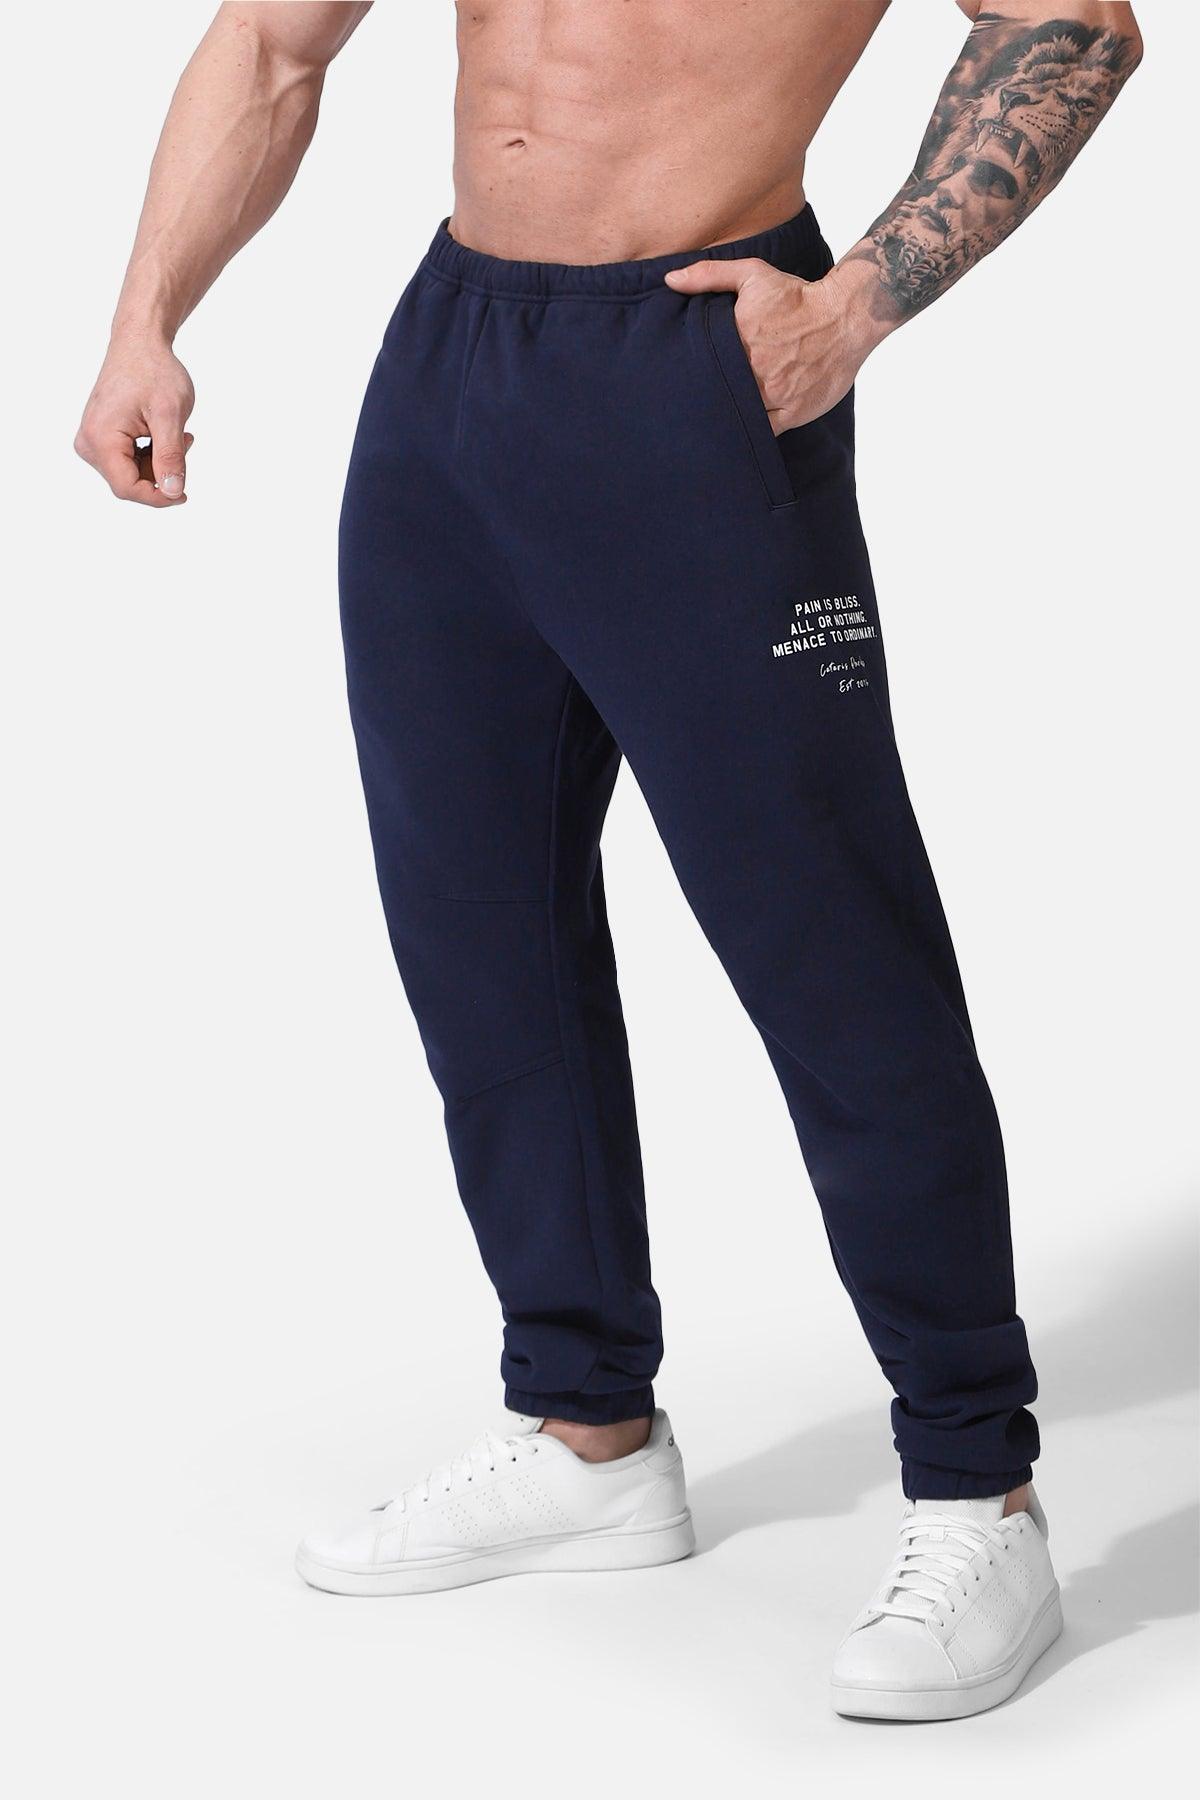 All Or Nothing French Terry Joggers - Navy - Jed North Canada